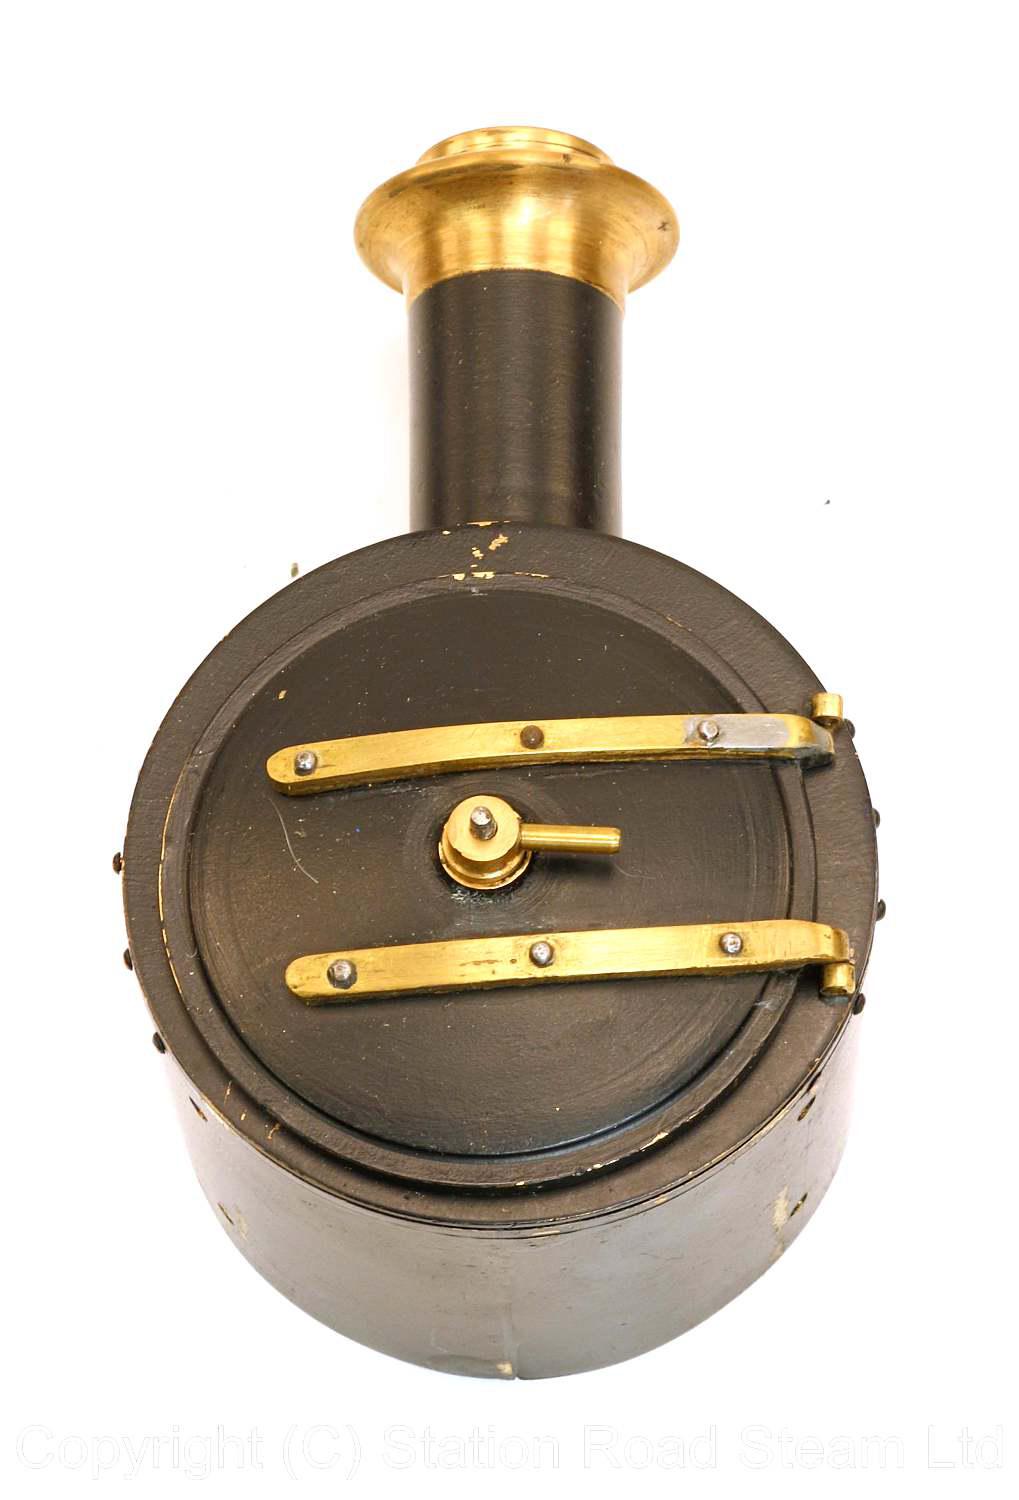 3 1/2 inch gauge part-built "Rob Roy" 0-6-0T, new CE-marked boiler